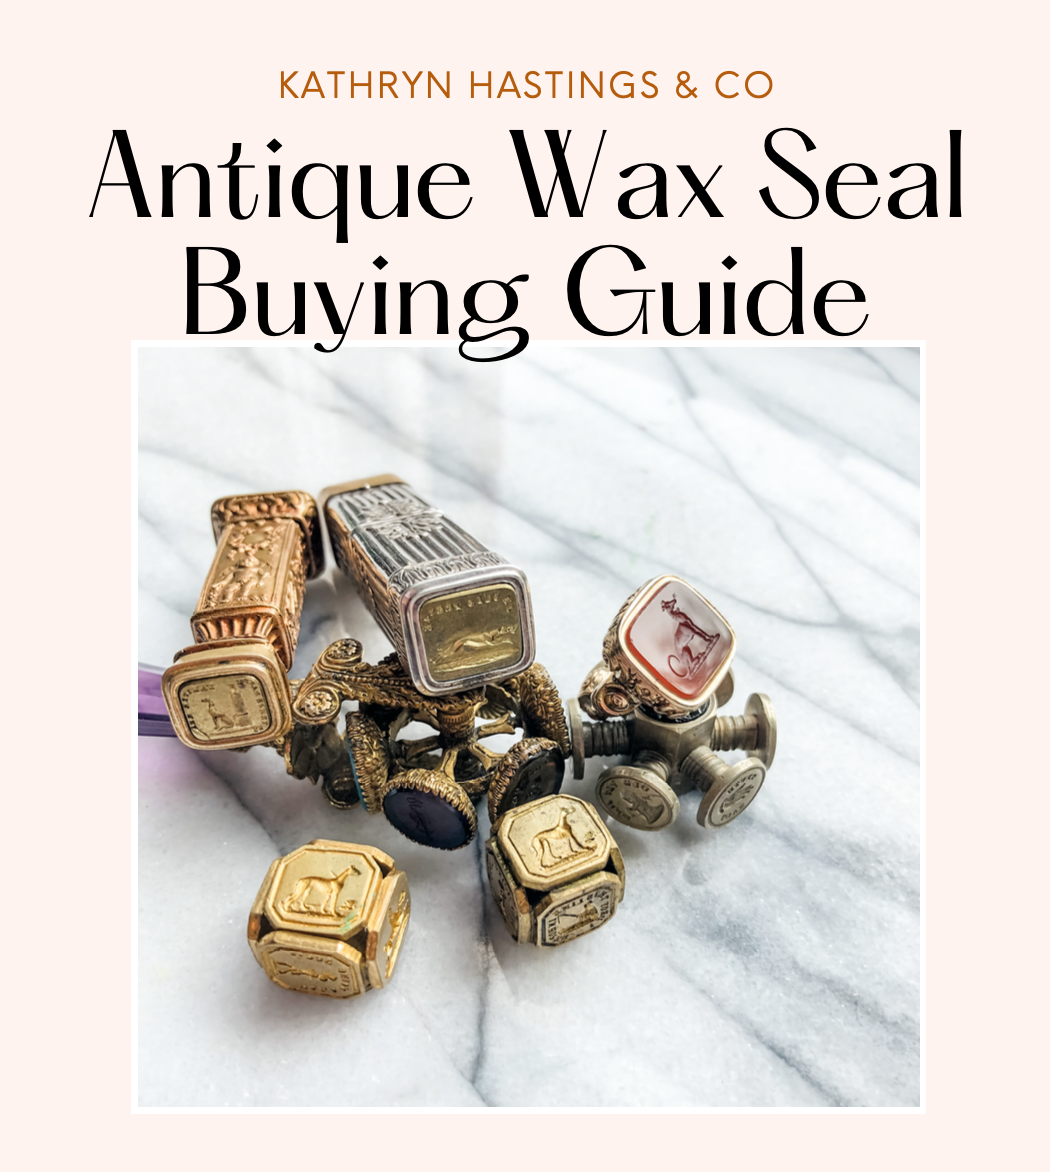 Antique Wax Seal Buying Guide